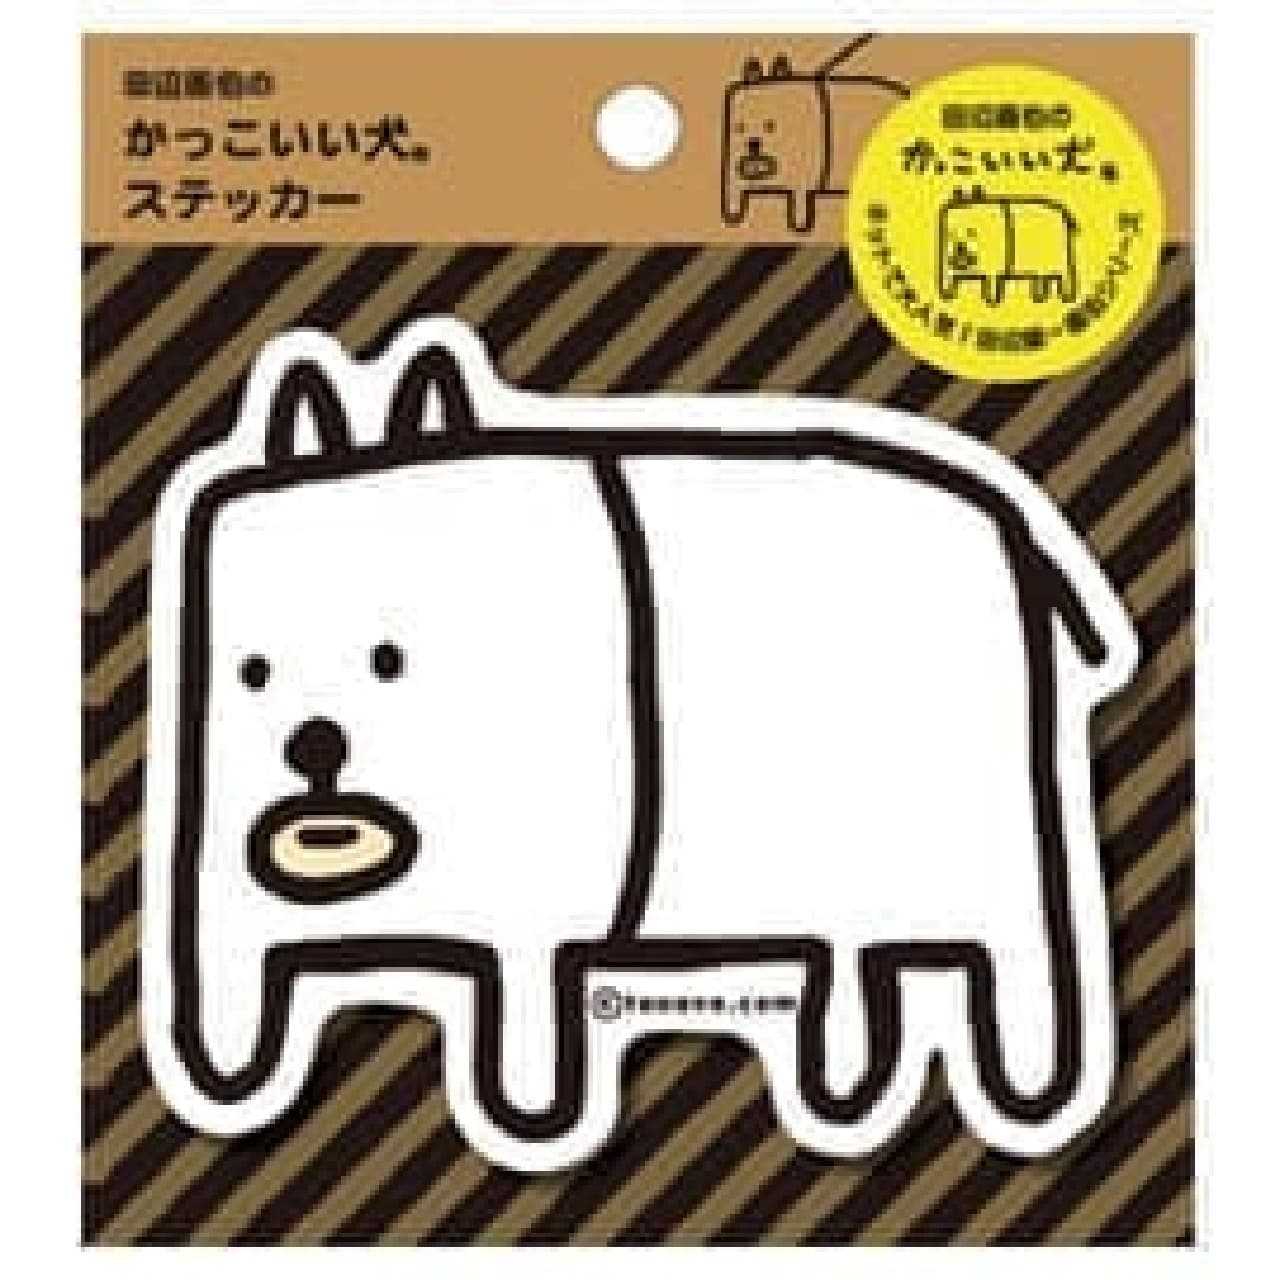 The second stationery "cool dog."